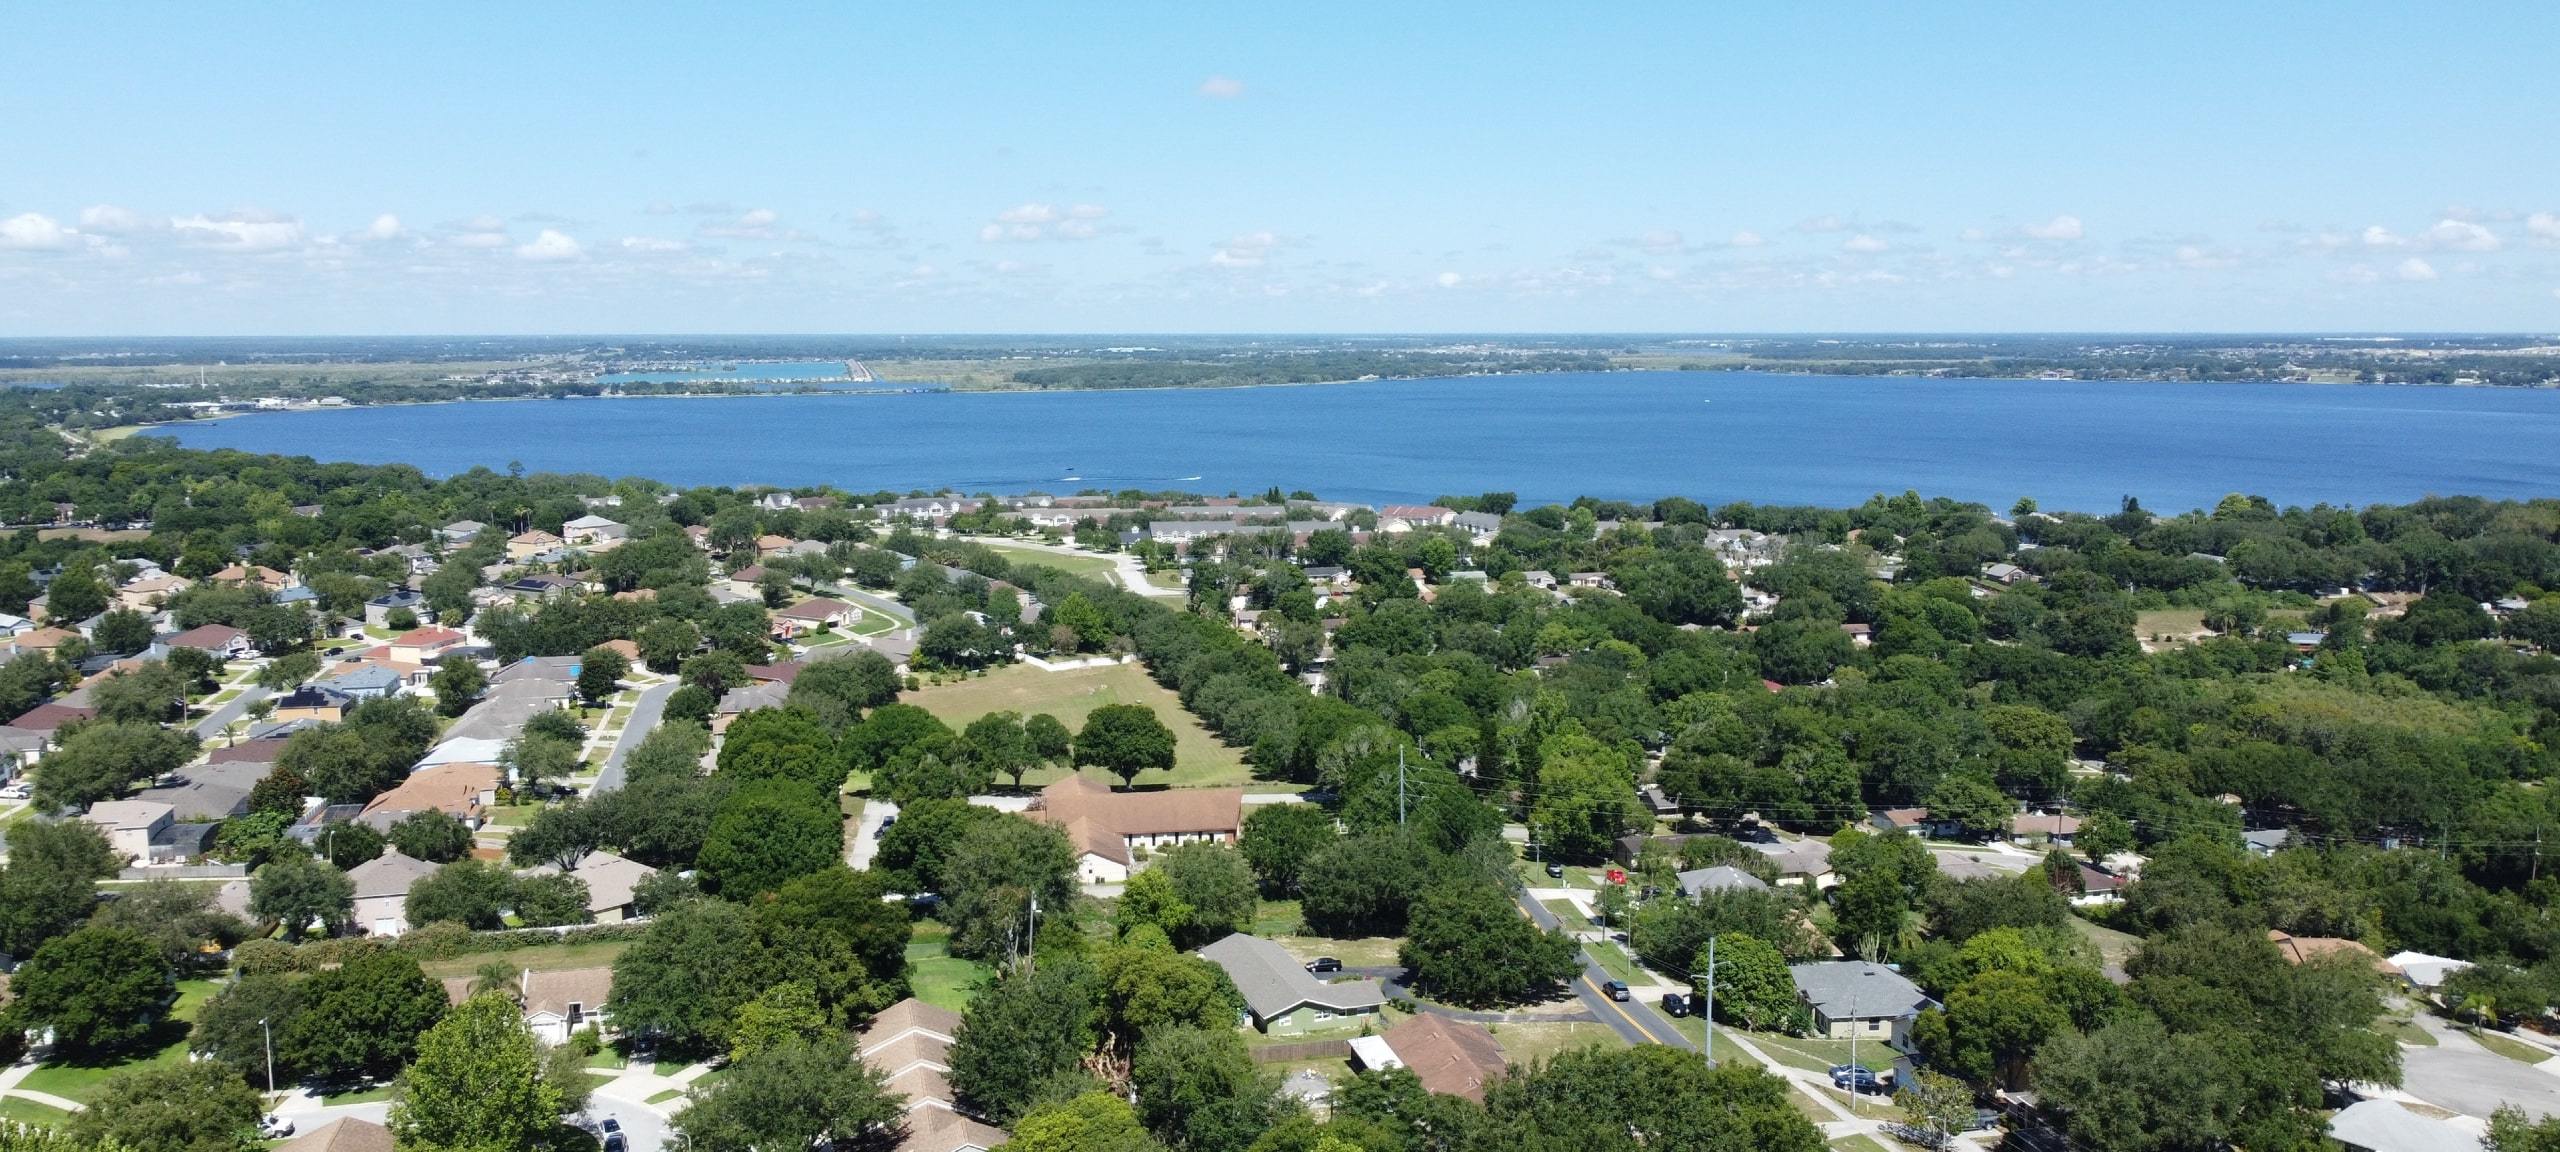 Aerial view over homes by the lakefront in Clermont, FL